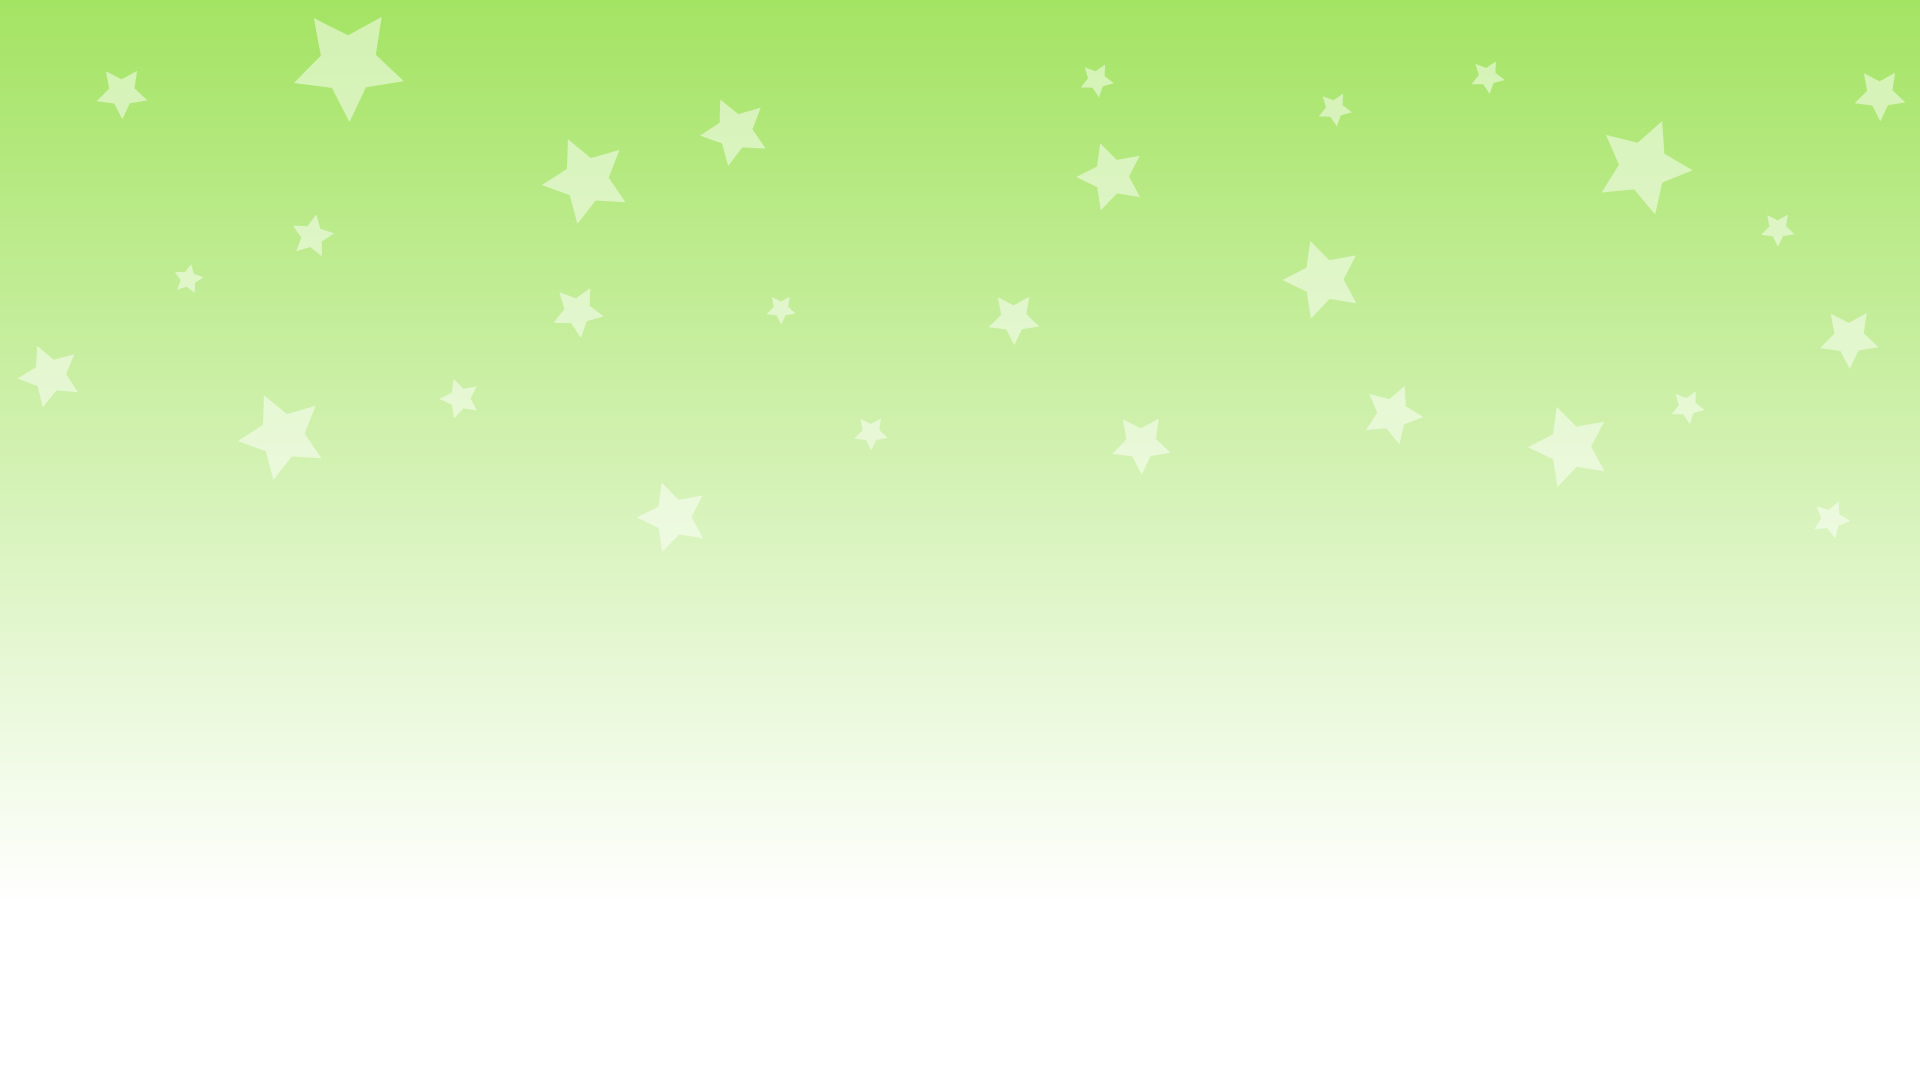 Shooting Star Background For